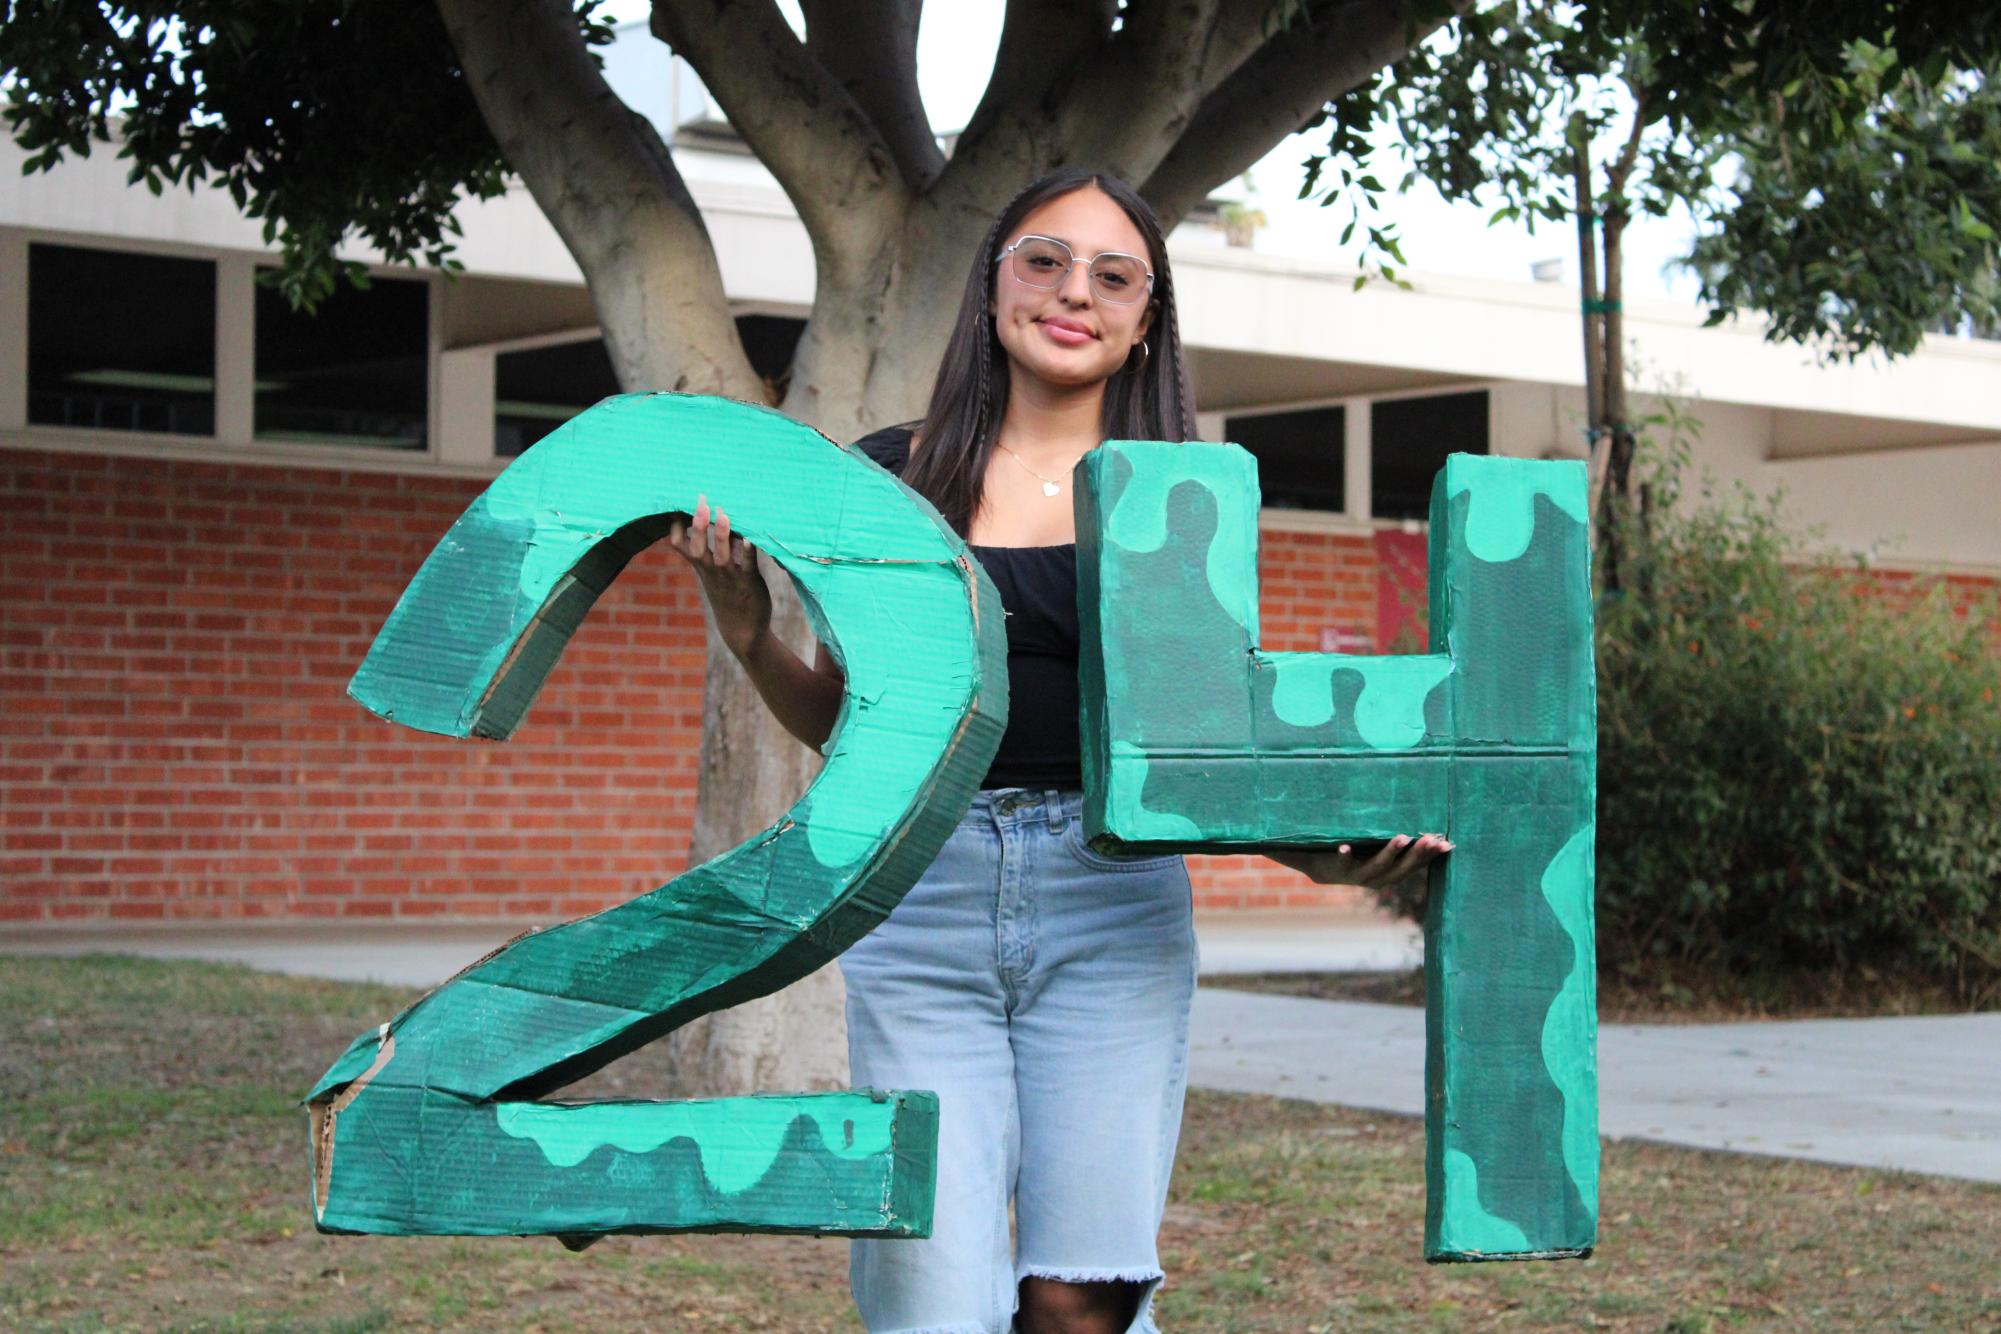 Salazar represents her class’ graduation year’s number in front of the area where the senior class council works on Nov. 13.